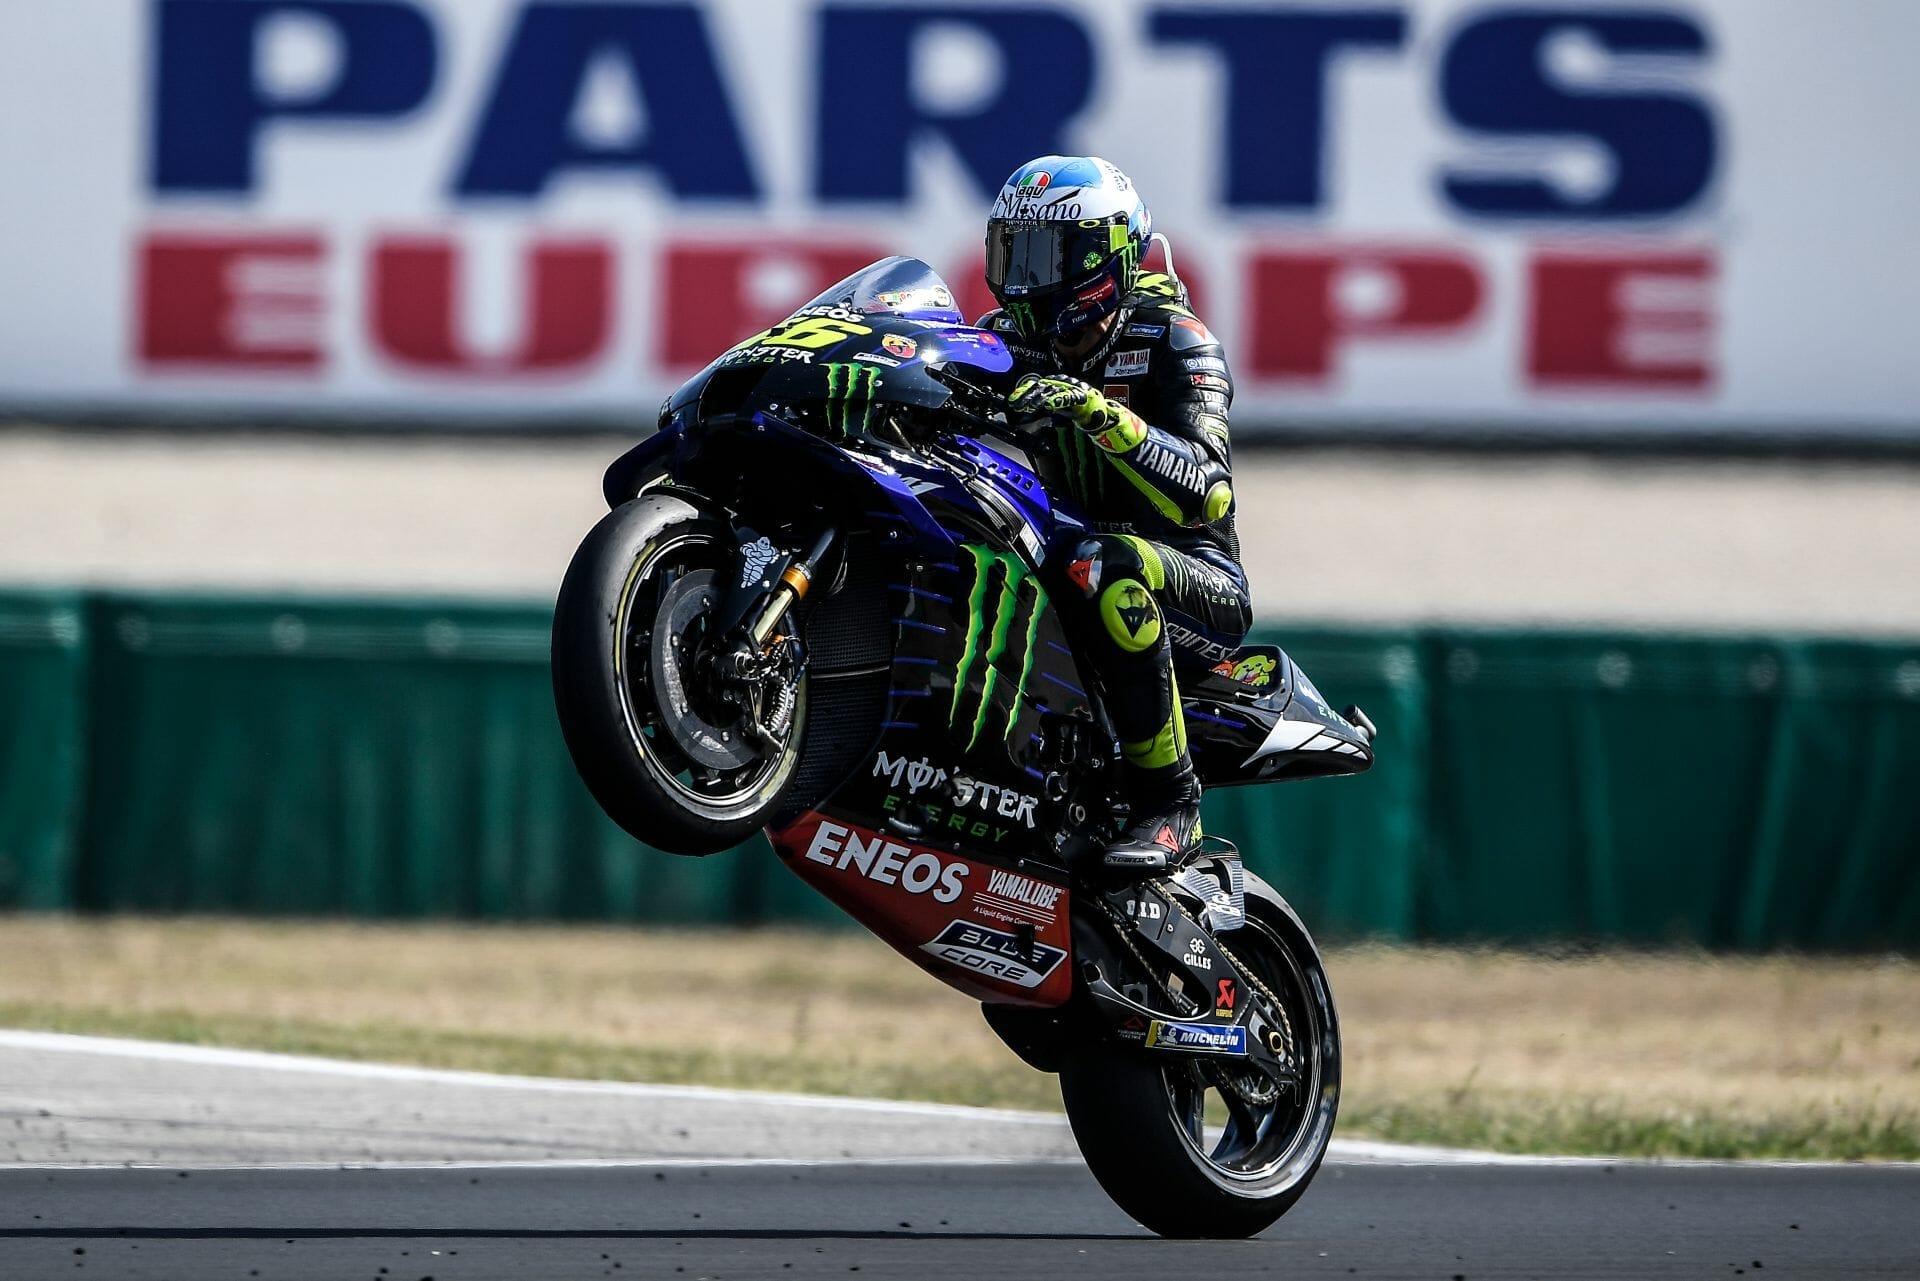 Second MotoGP race at Misano - Vinales takes victory after fell of Bagnaia
- also in the App MOTORCYCLE NEWS